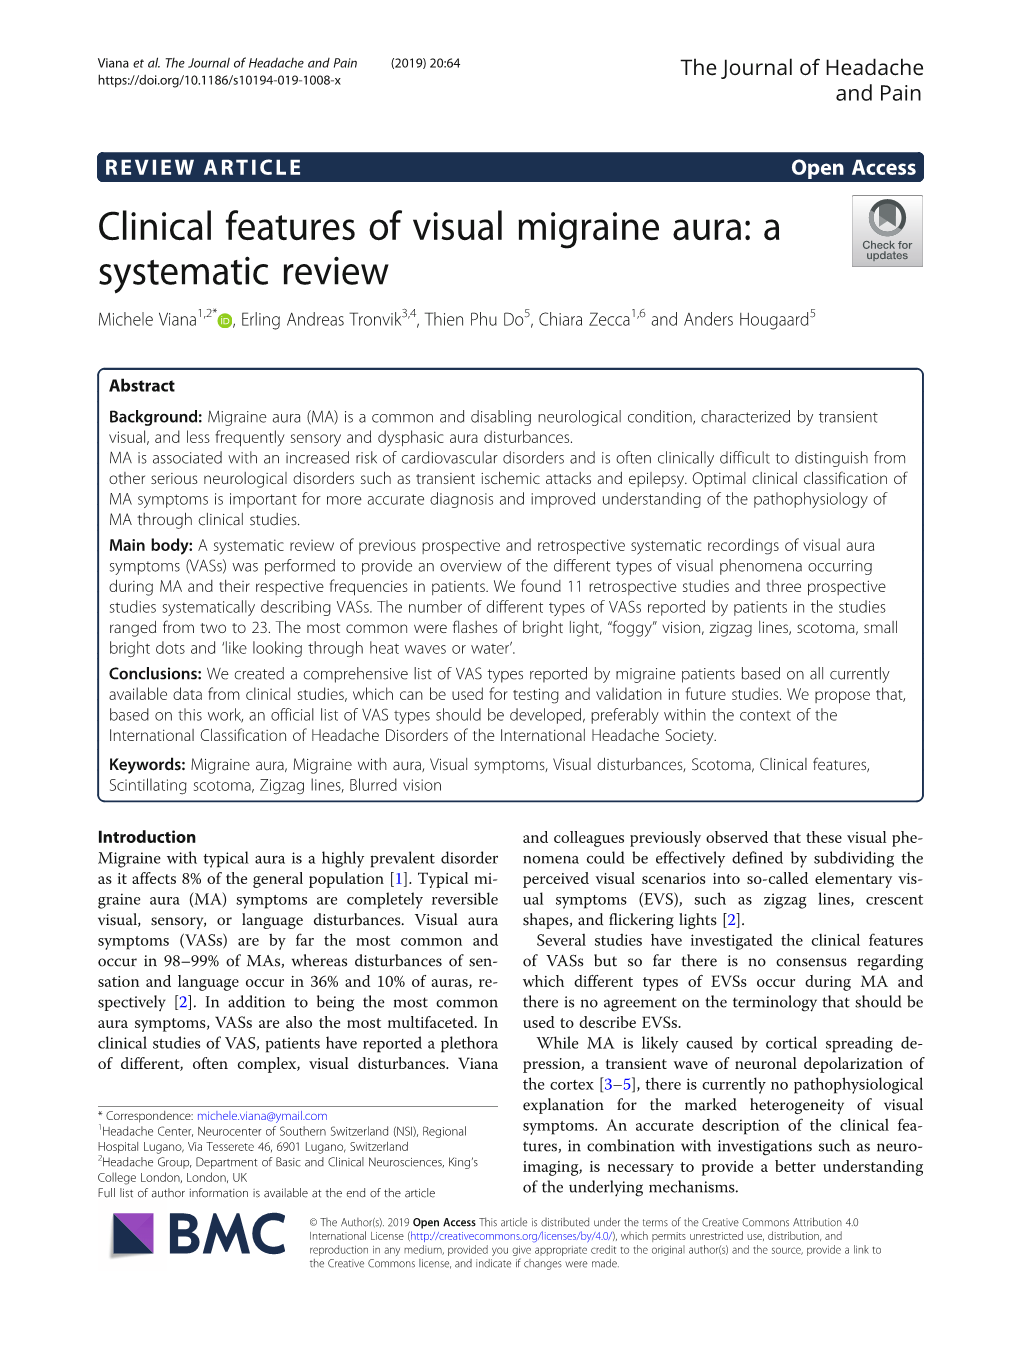 Clinical Features of Visual Migraine Aura: a Systematic Review Michele Viana1,2* , Erling Andreas Tronvik3,4, Thien Phu Do5, Chiara Zecca1,6 and Anders Hougaard5